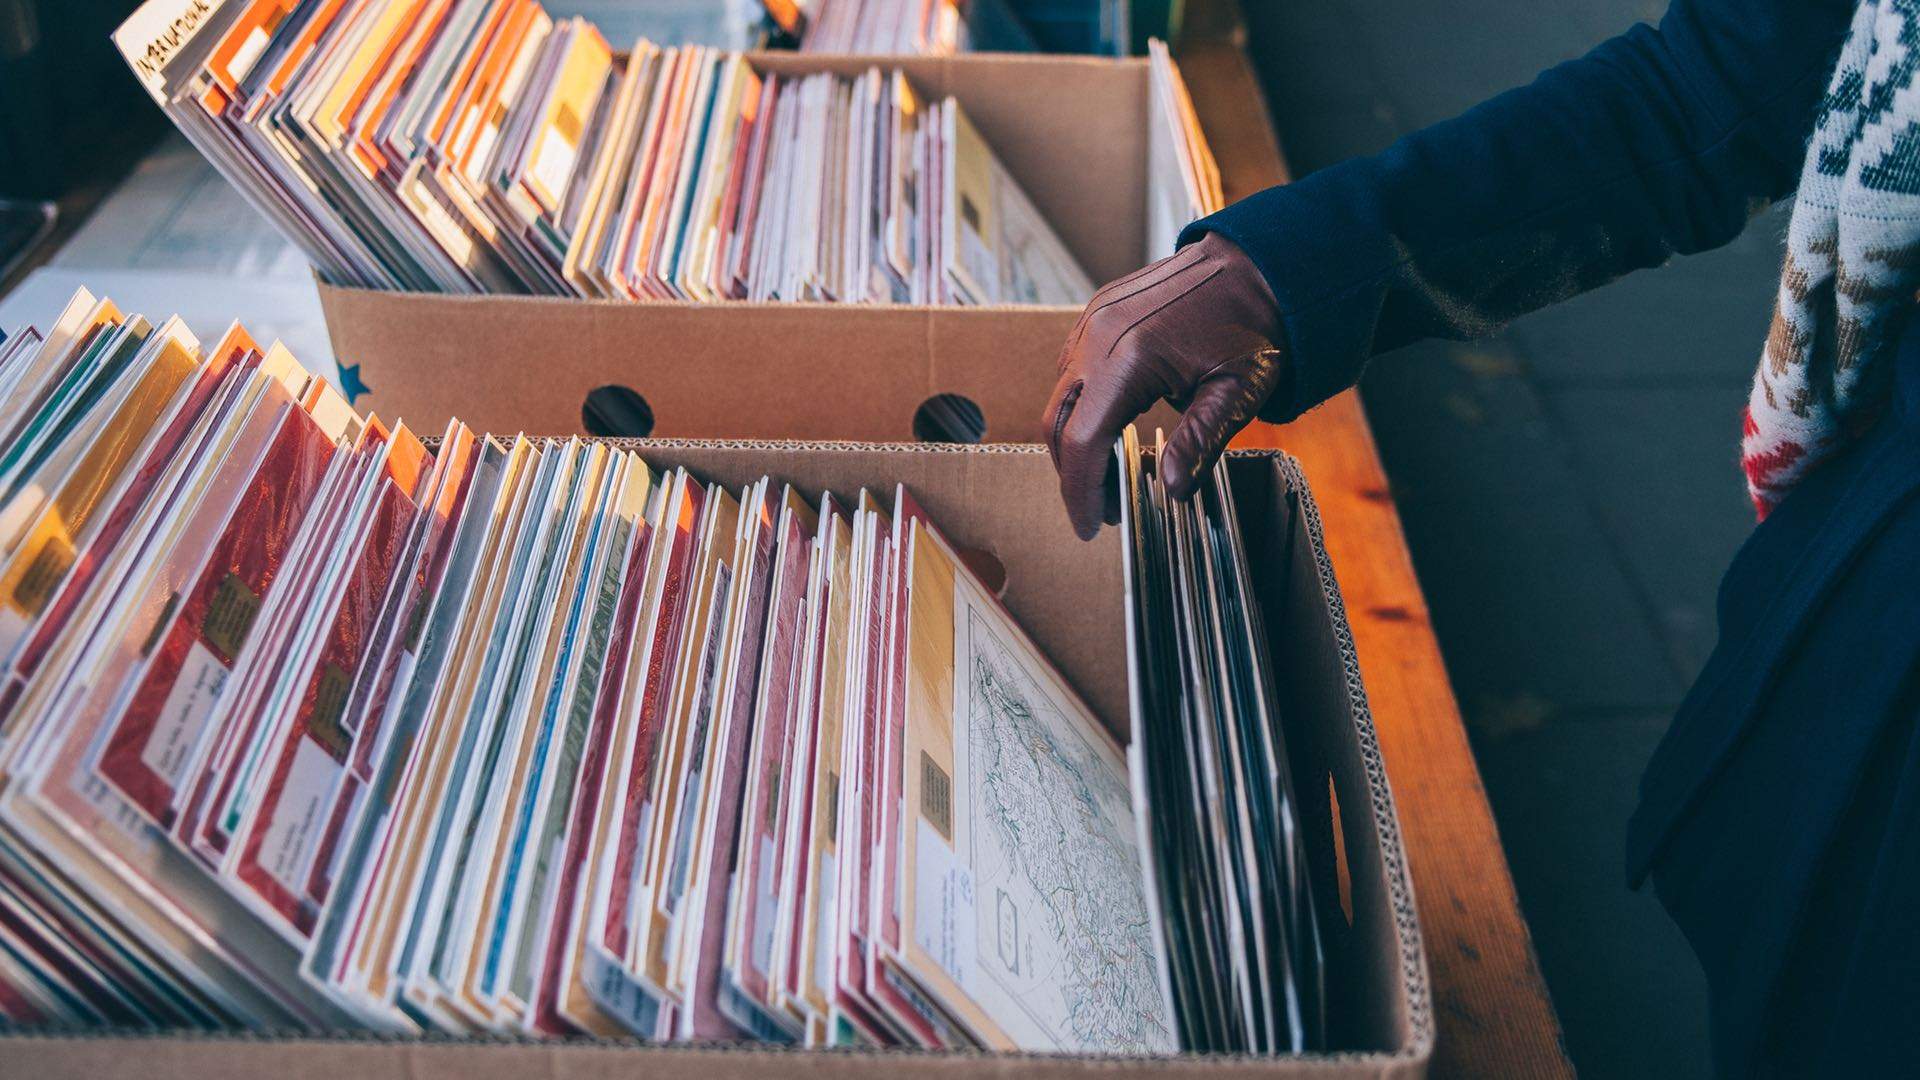 The Other Crate Record Fair